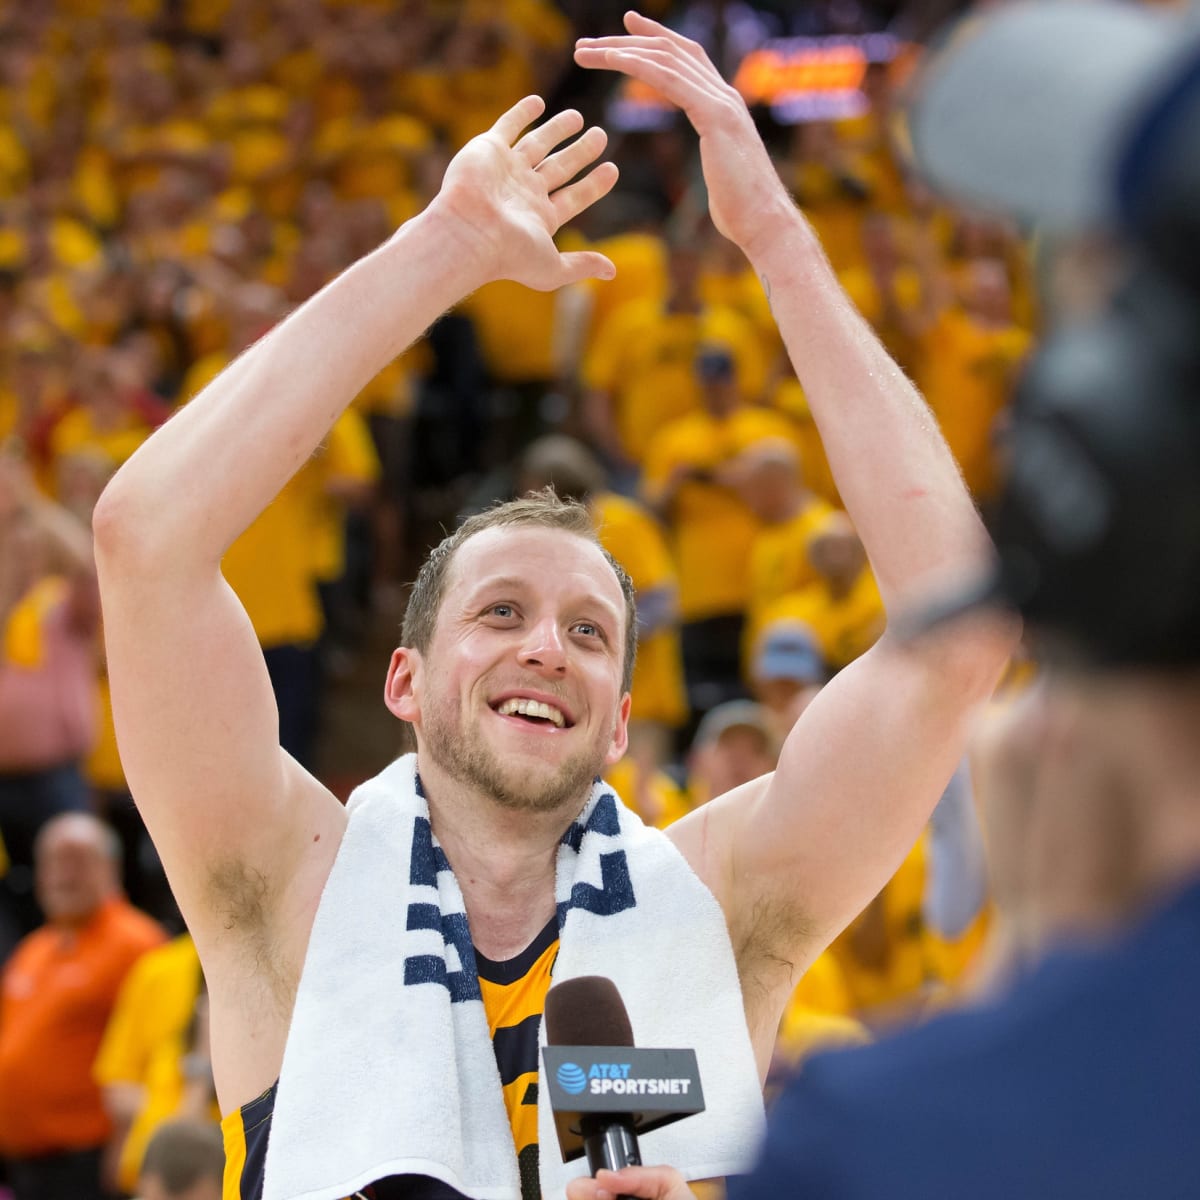 Jazz give Joe Ingles the most reasonable extension of the day